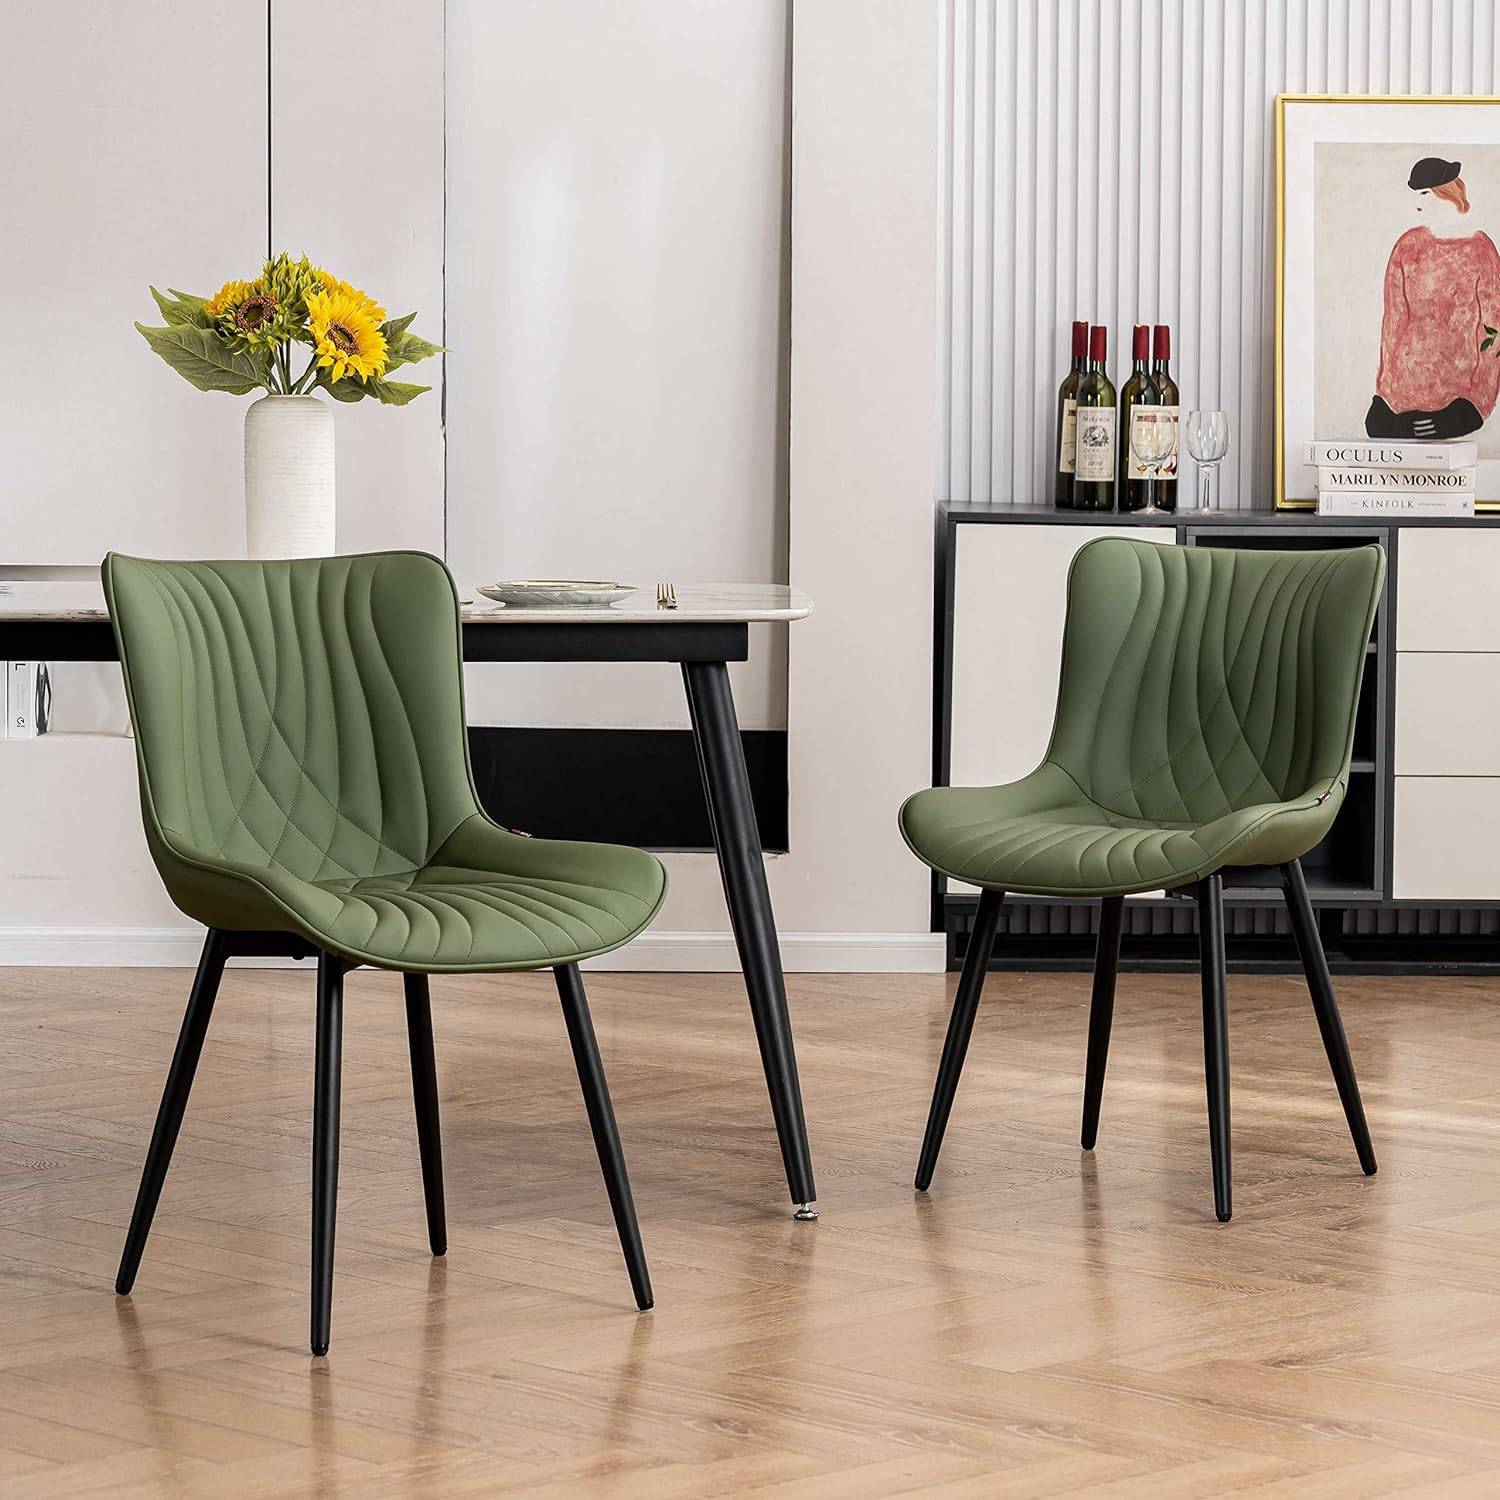 Green modern chairs in a living room with black legs.